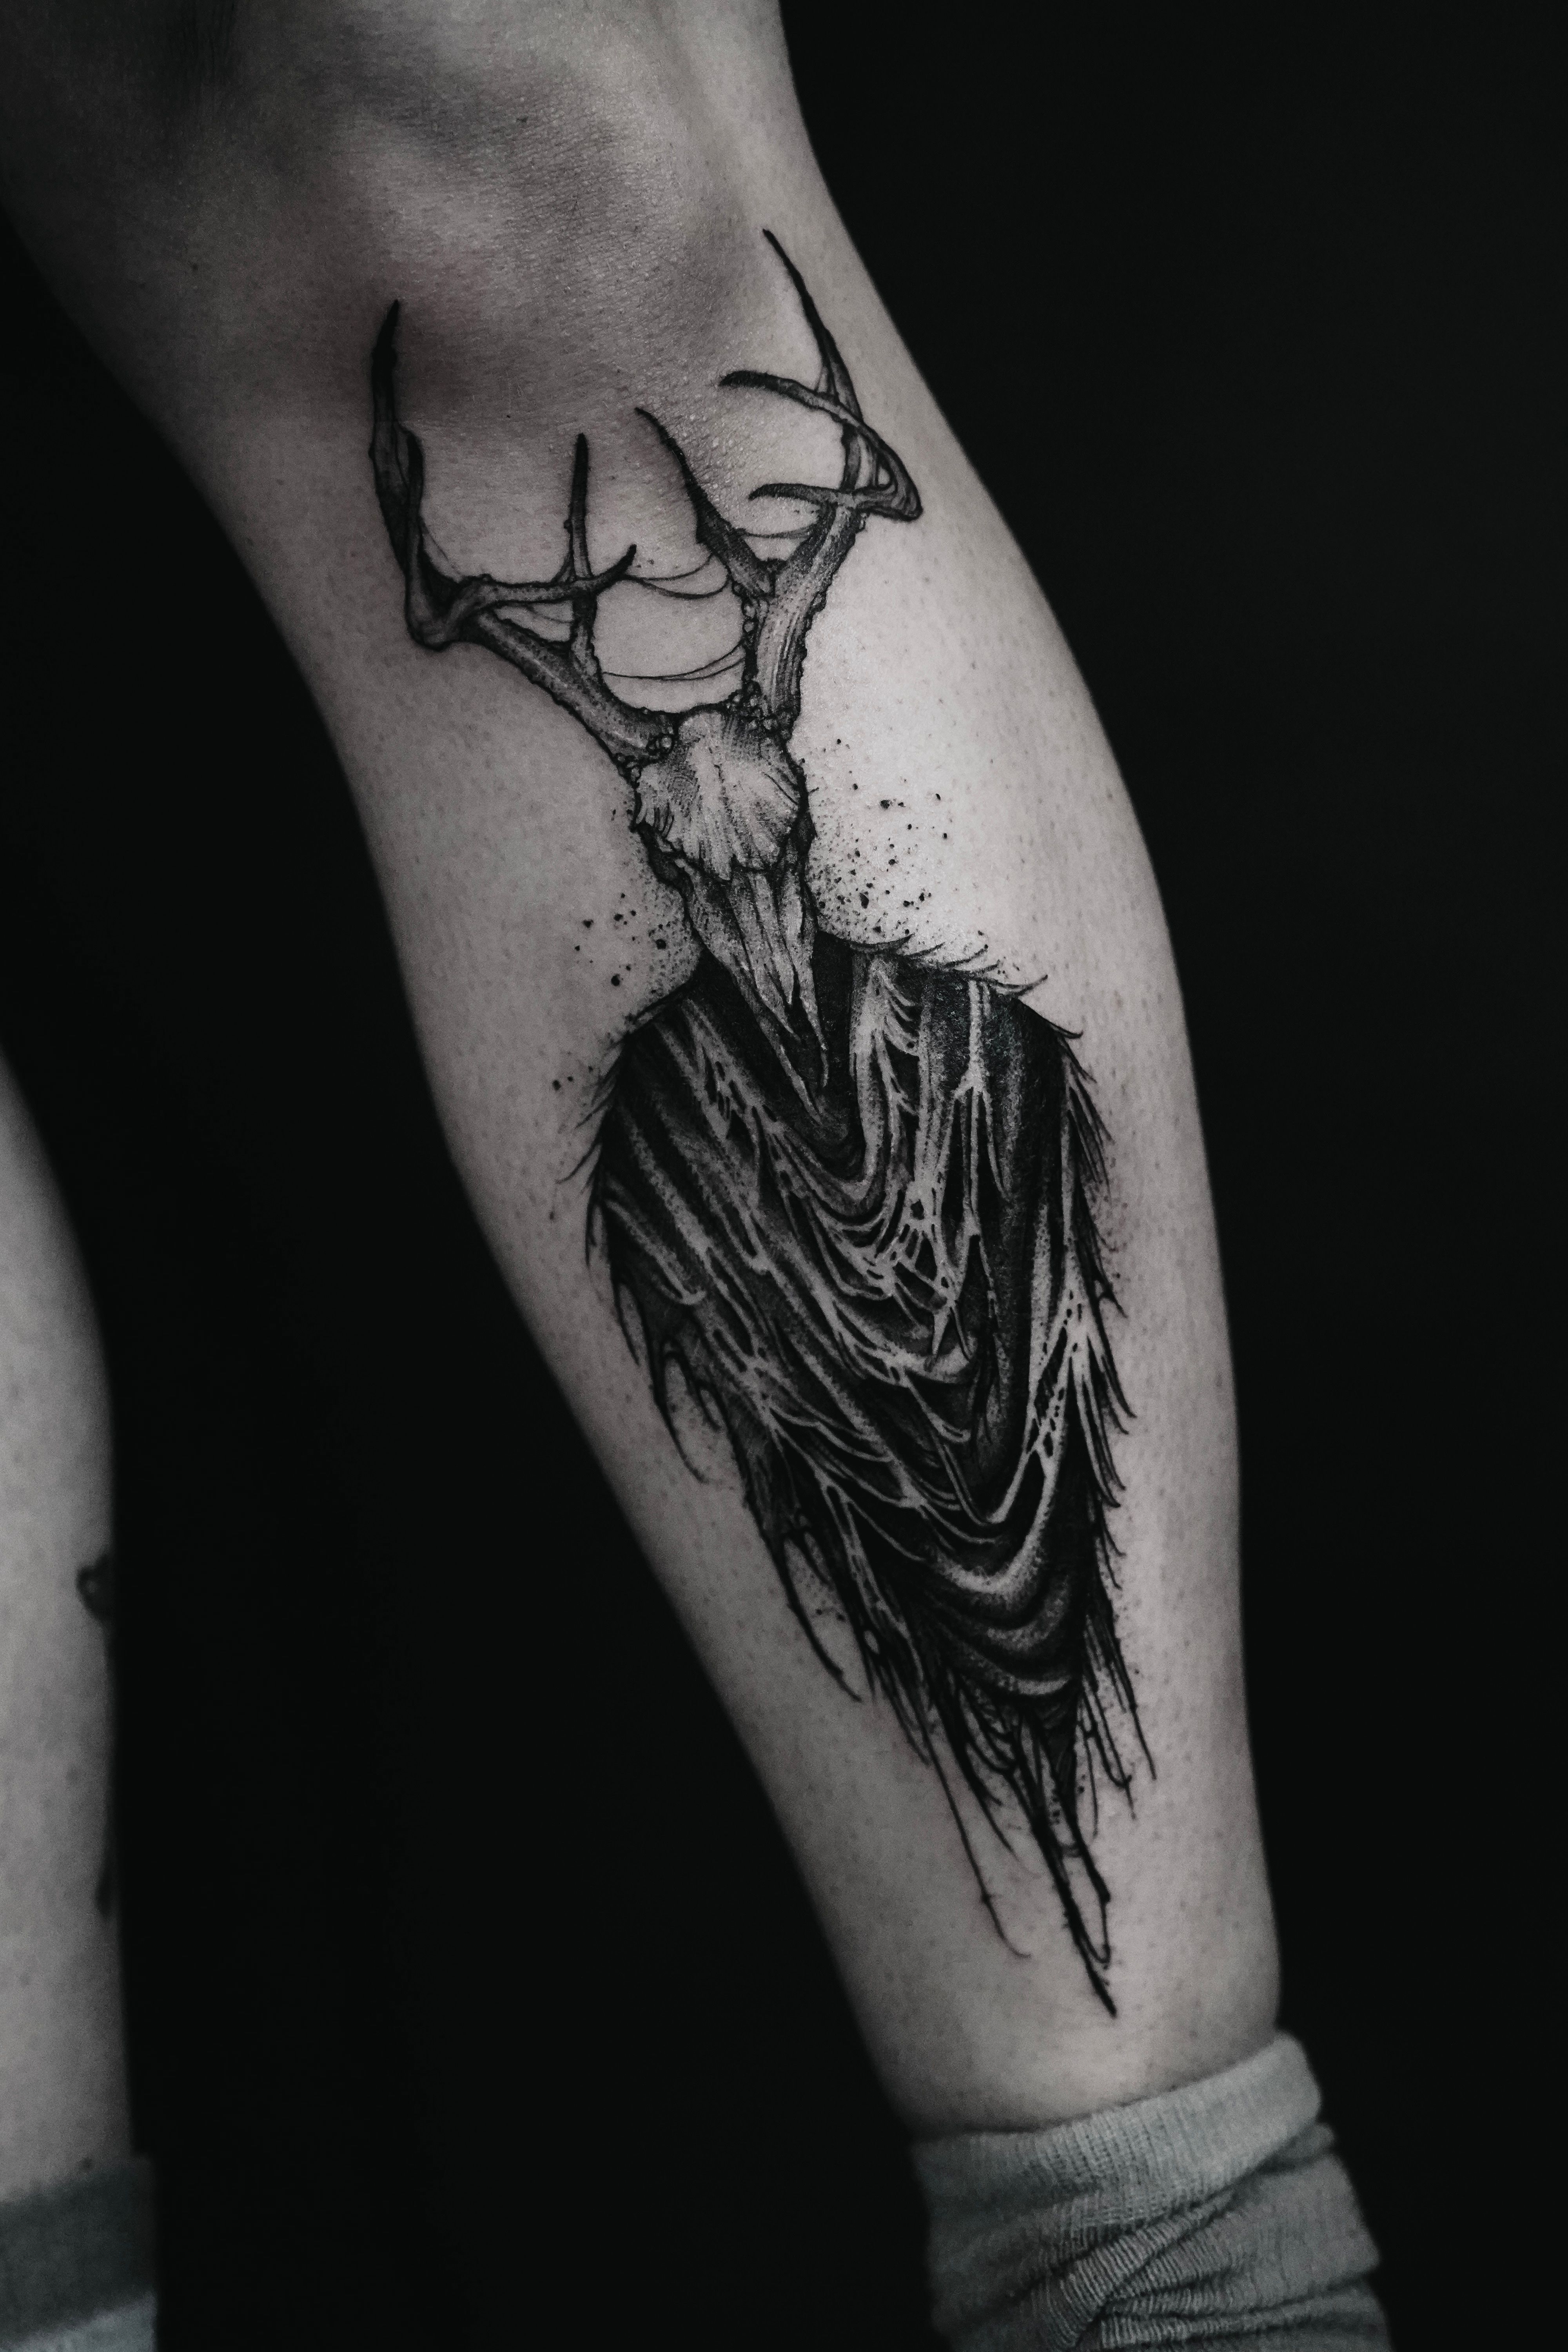 Check out this custom deer skull tattoo by our artist @dzulmaster here at  @dzulinklounge! #customtattoos #dzulinklounge #seattle #tattoo | Instagram